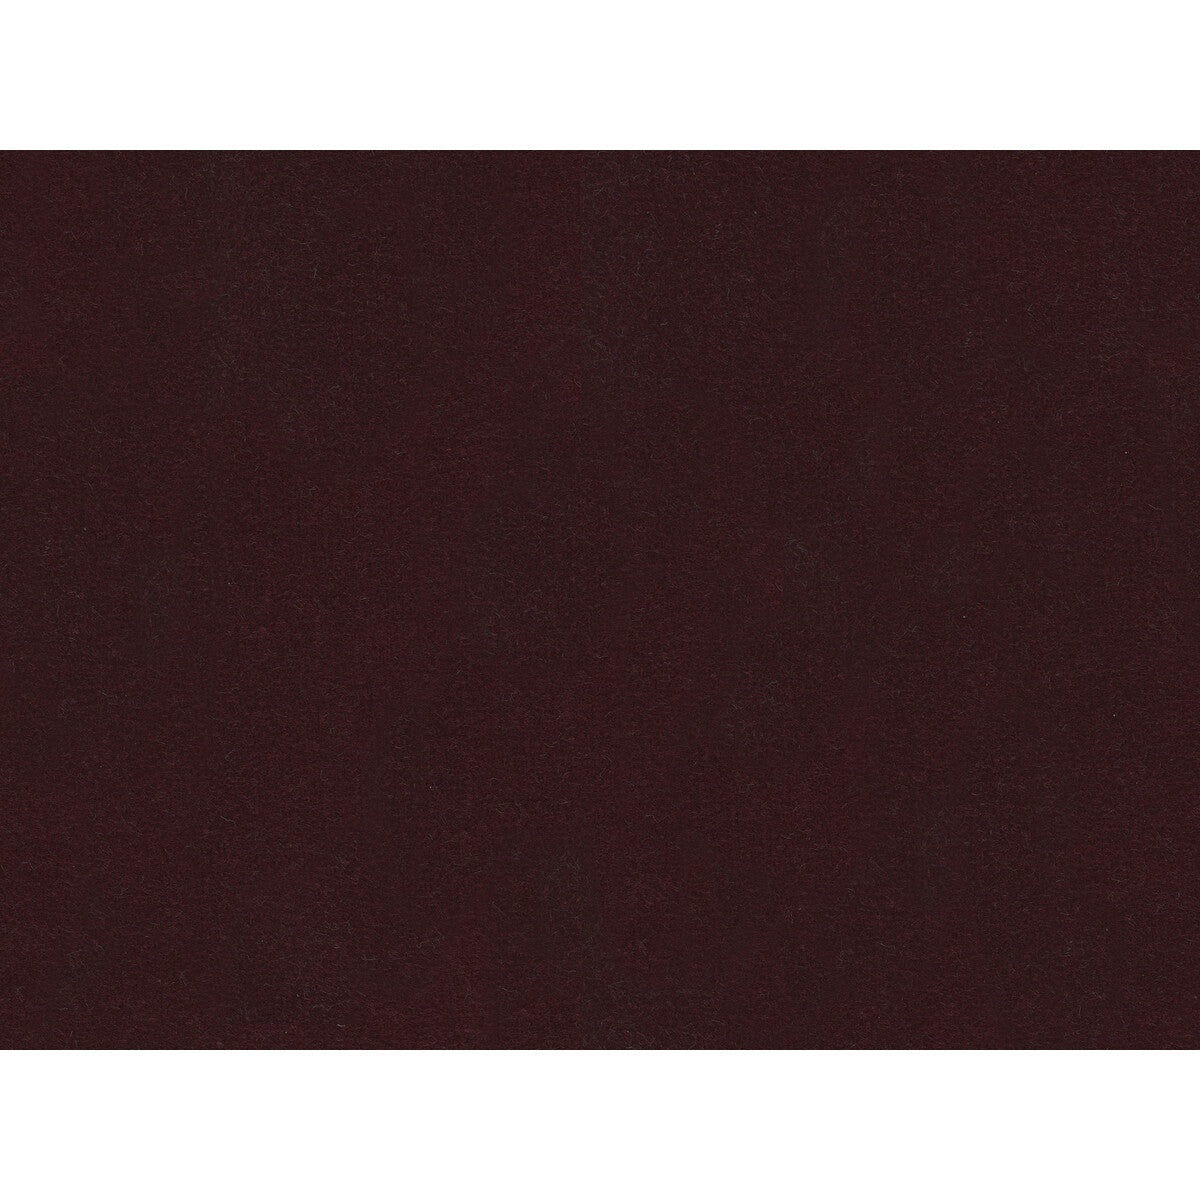 Statuesque fabric in merlot color - pattern 34328.9.0 - by Kravet Couture